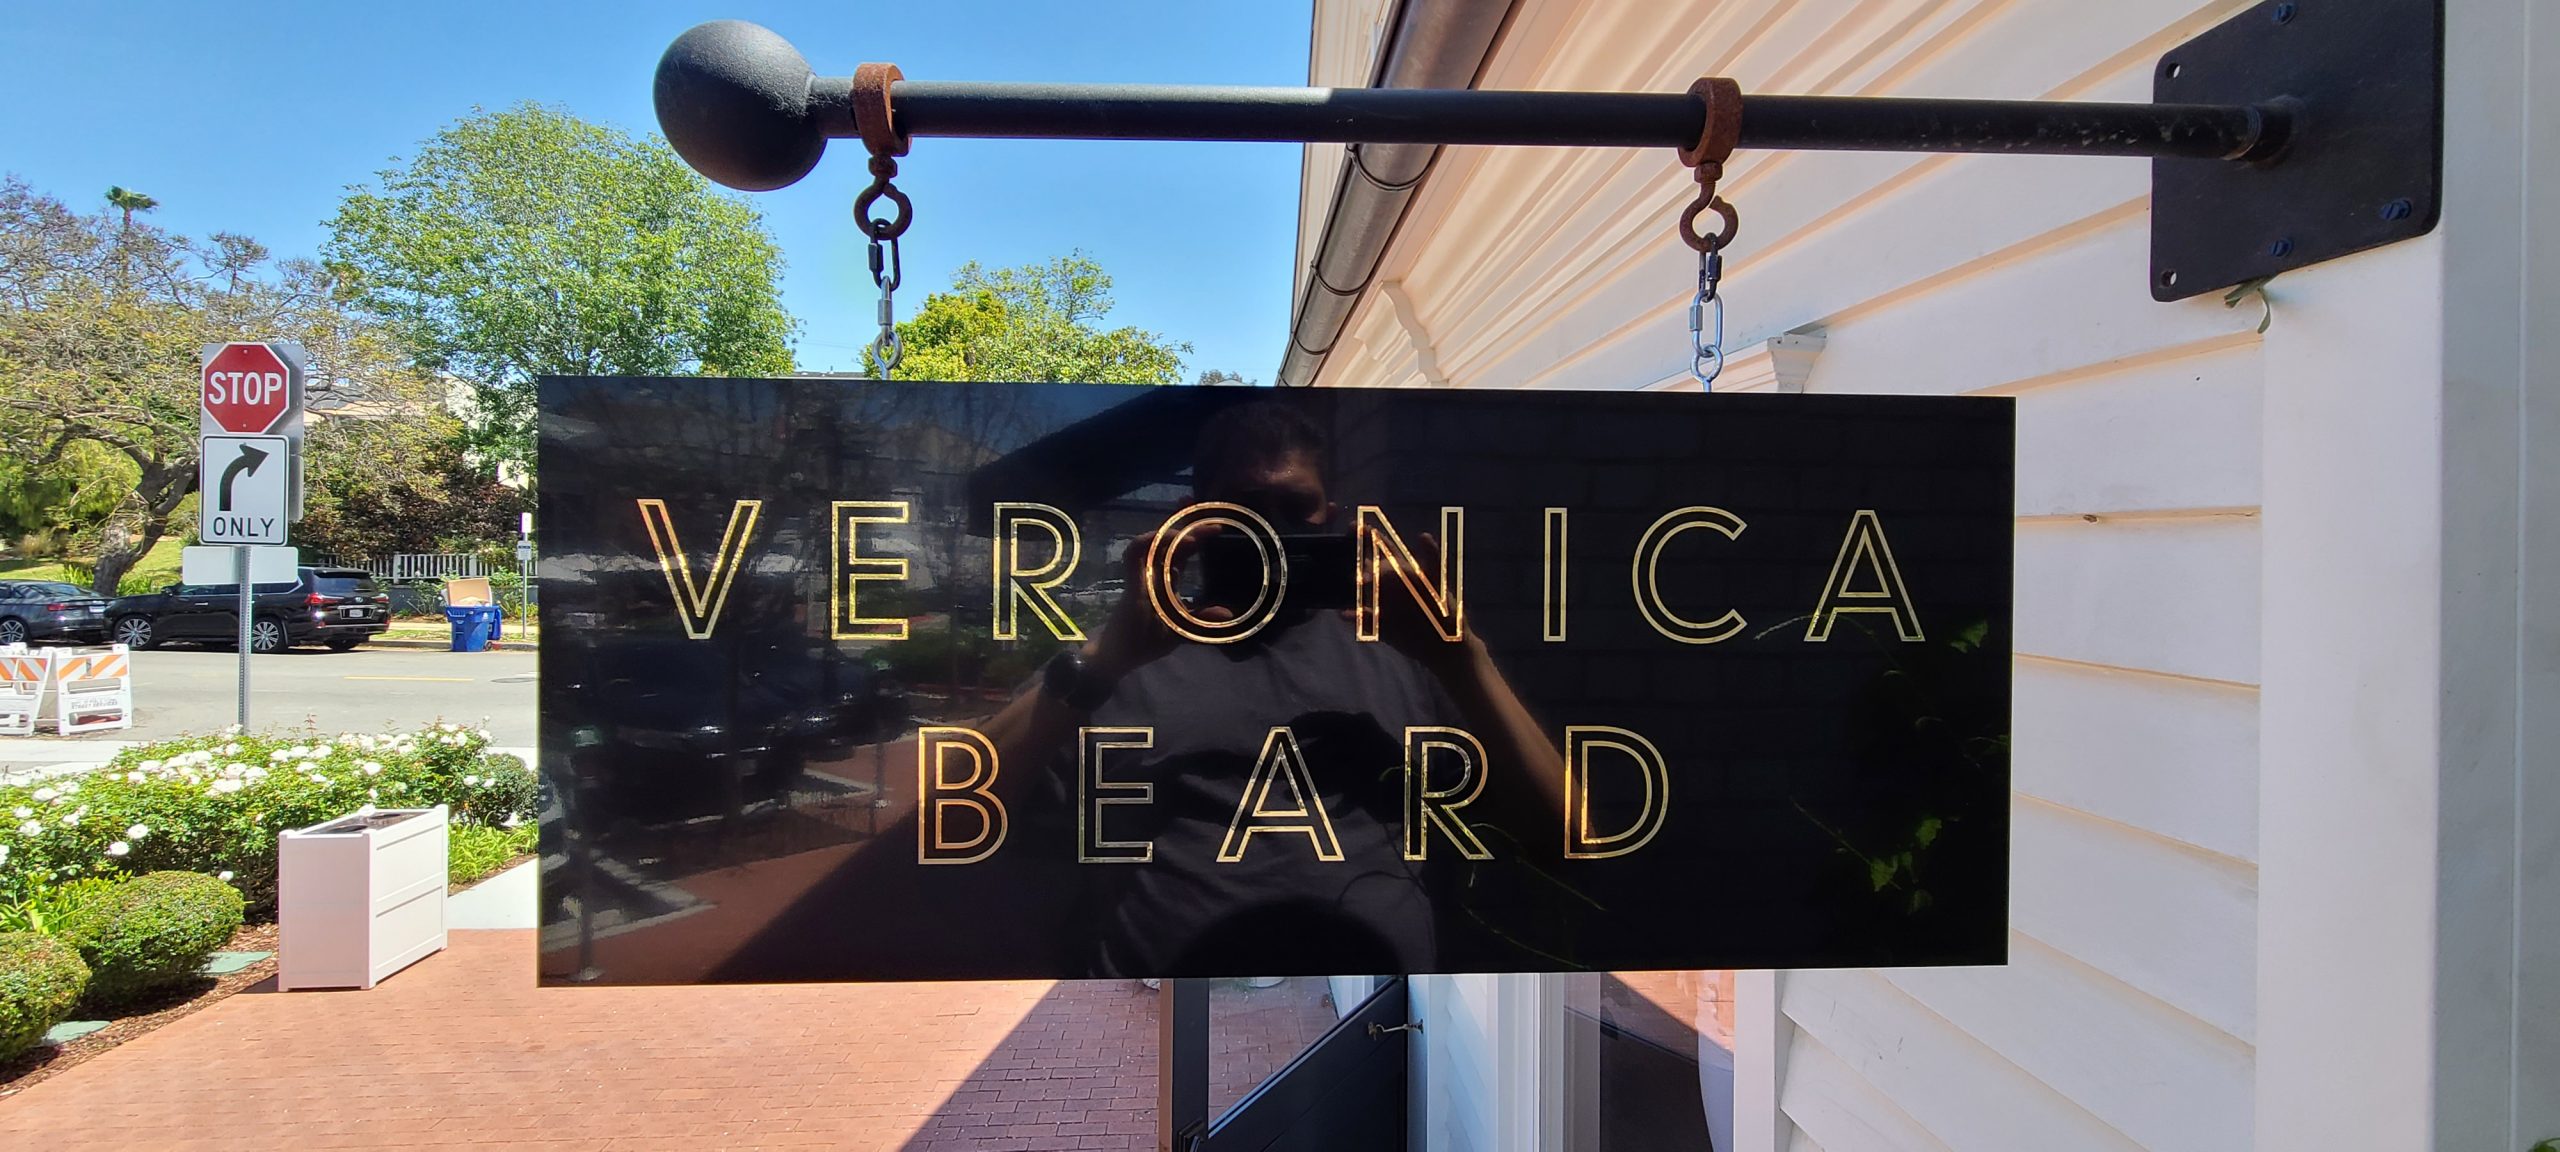 With more shoppers going out and about, captivating signage is a must. Like these blade signs for Veronica Beard in Pacific Palisades.